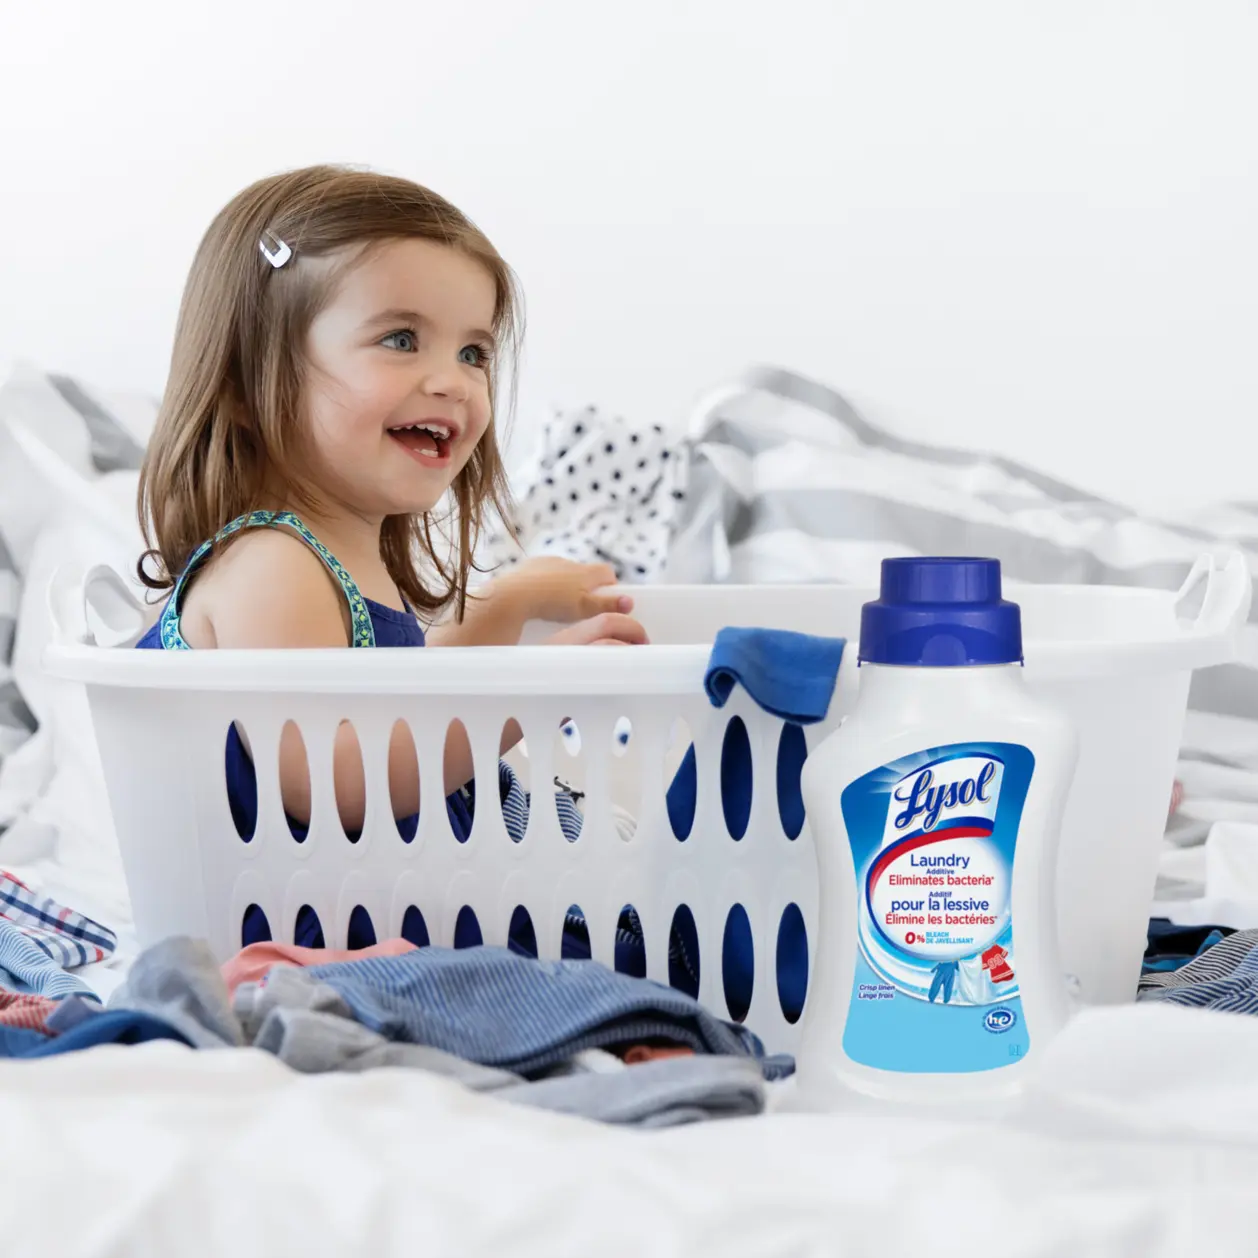 Young child sitting in plastic laundry basket and smiling surrounded by laundry and container of Lysol Laundry Sanitizer